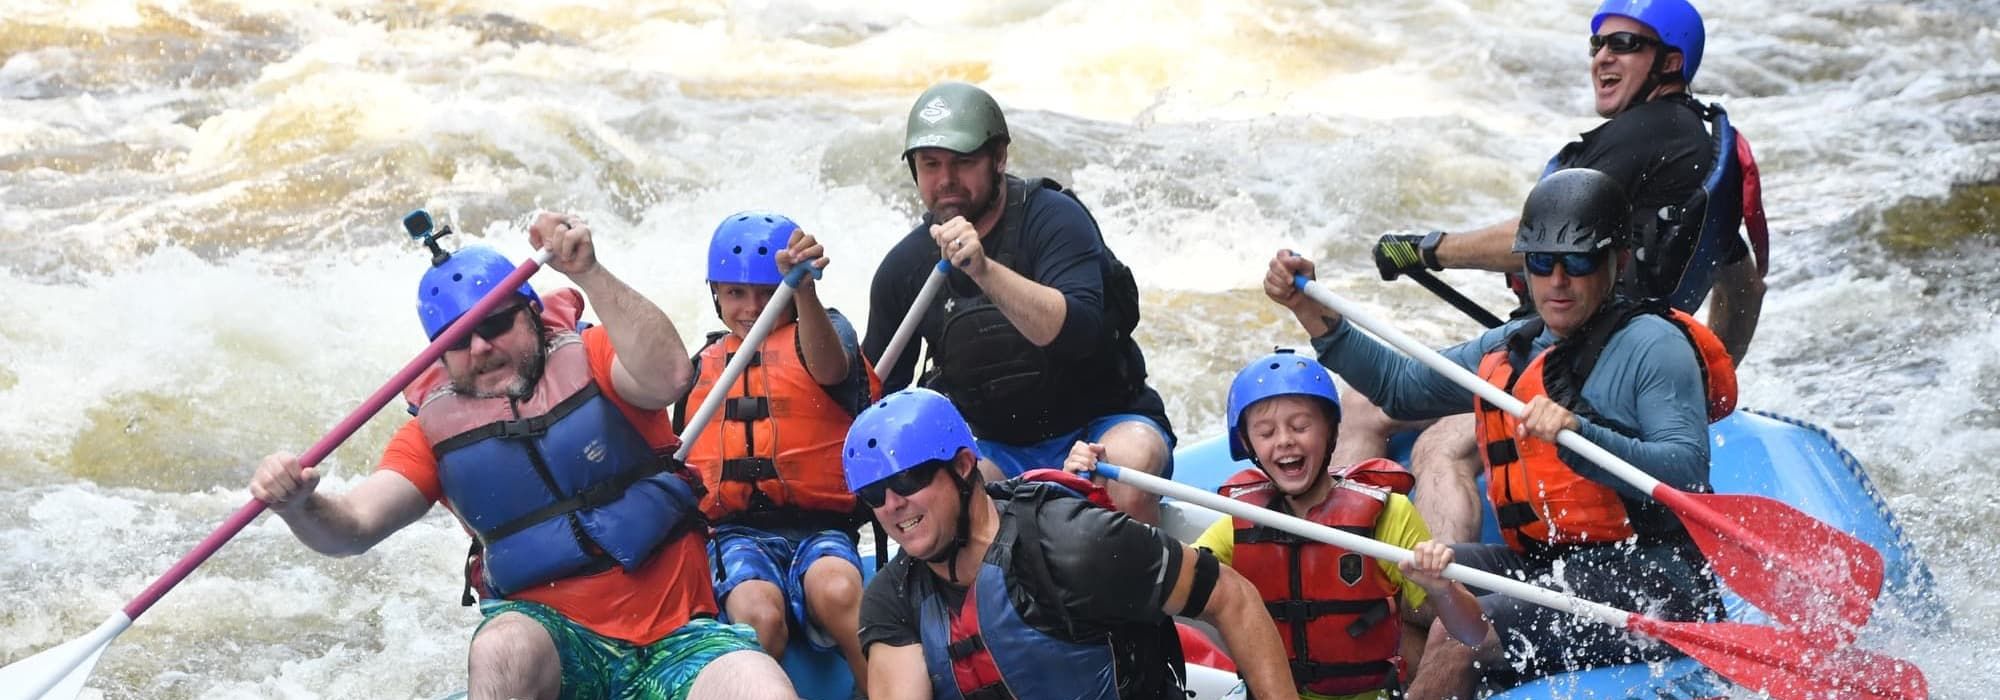 Whitewater Rafting on the Kennebec River in Maine